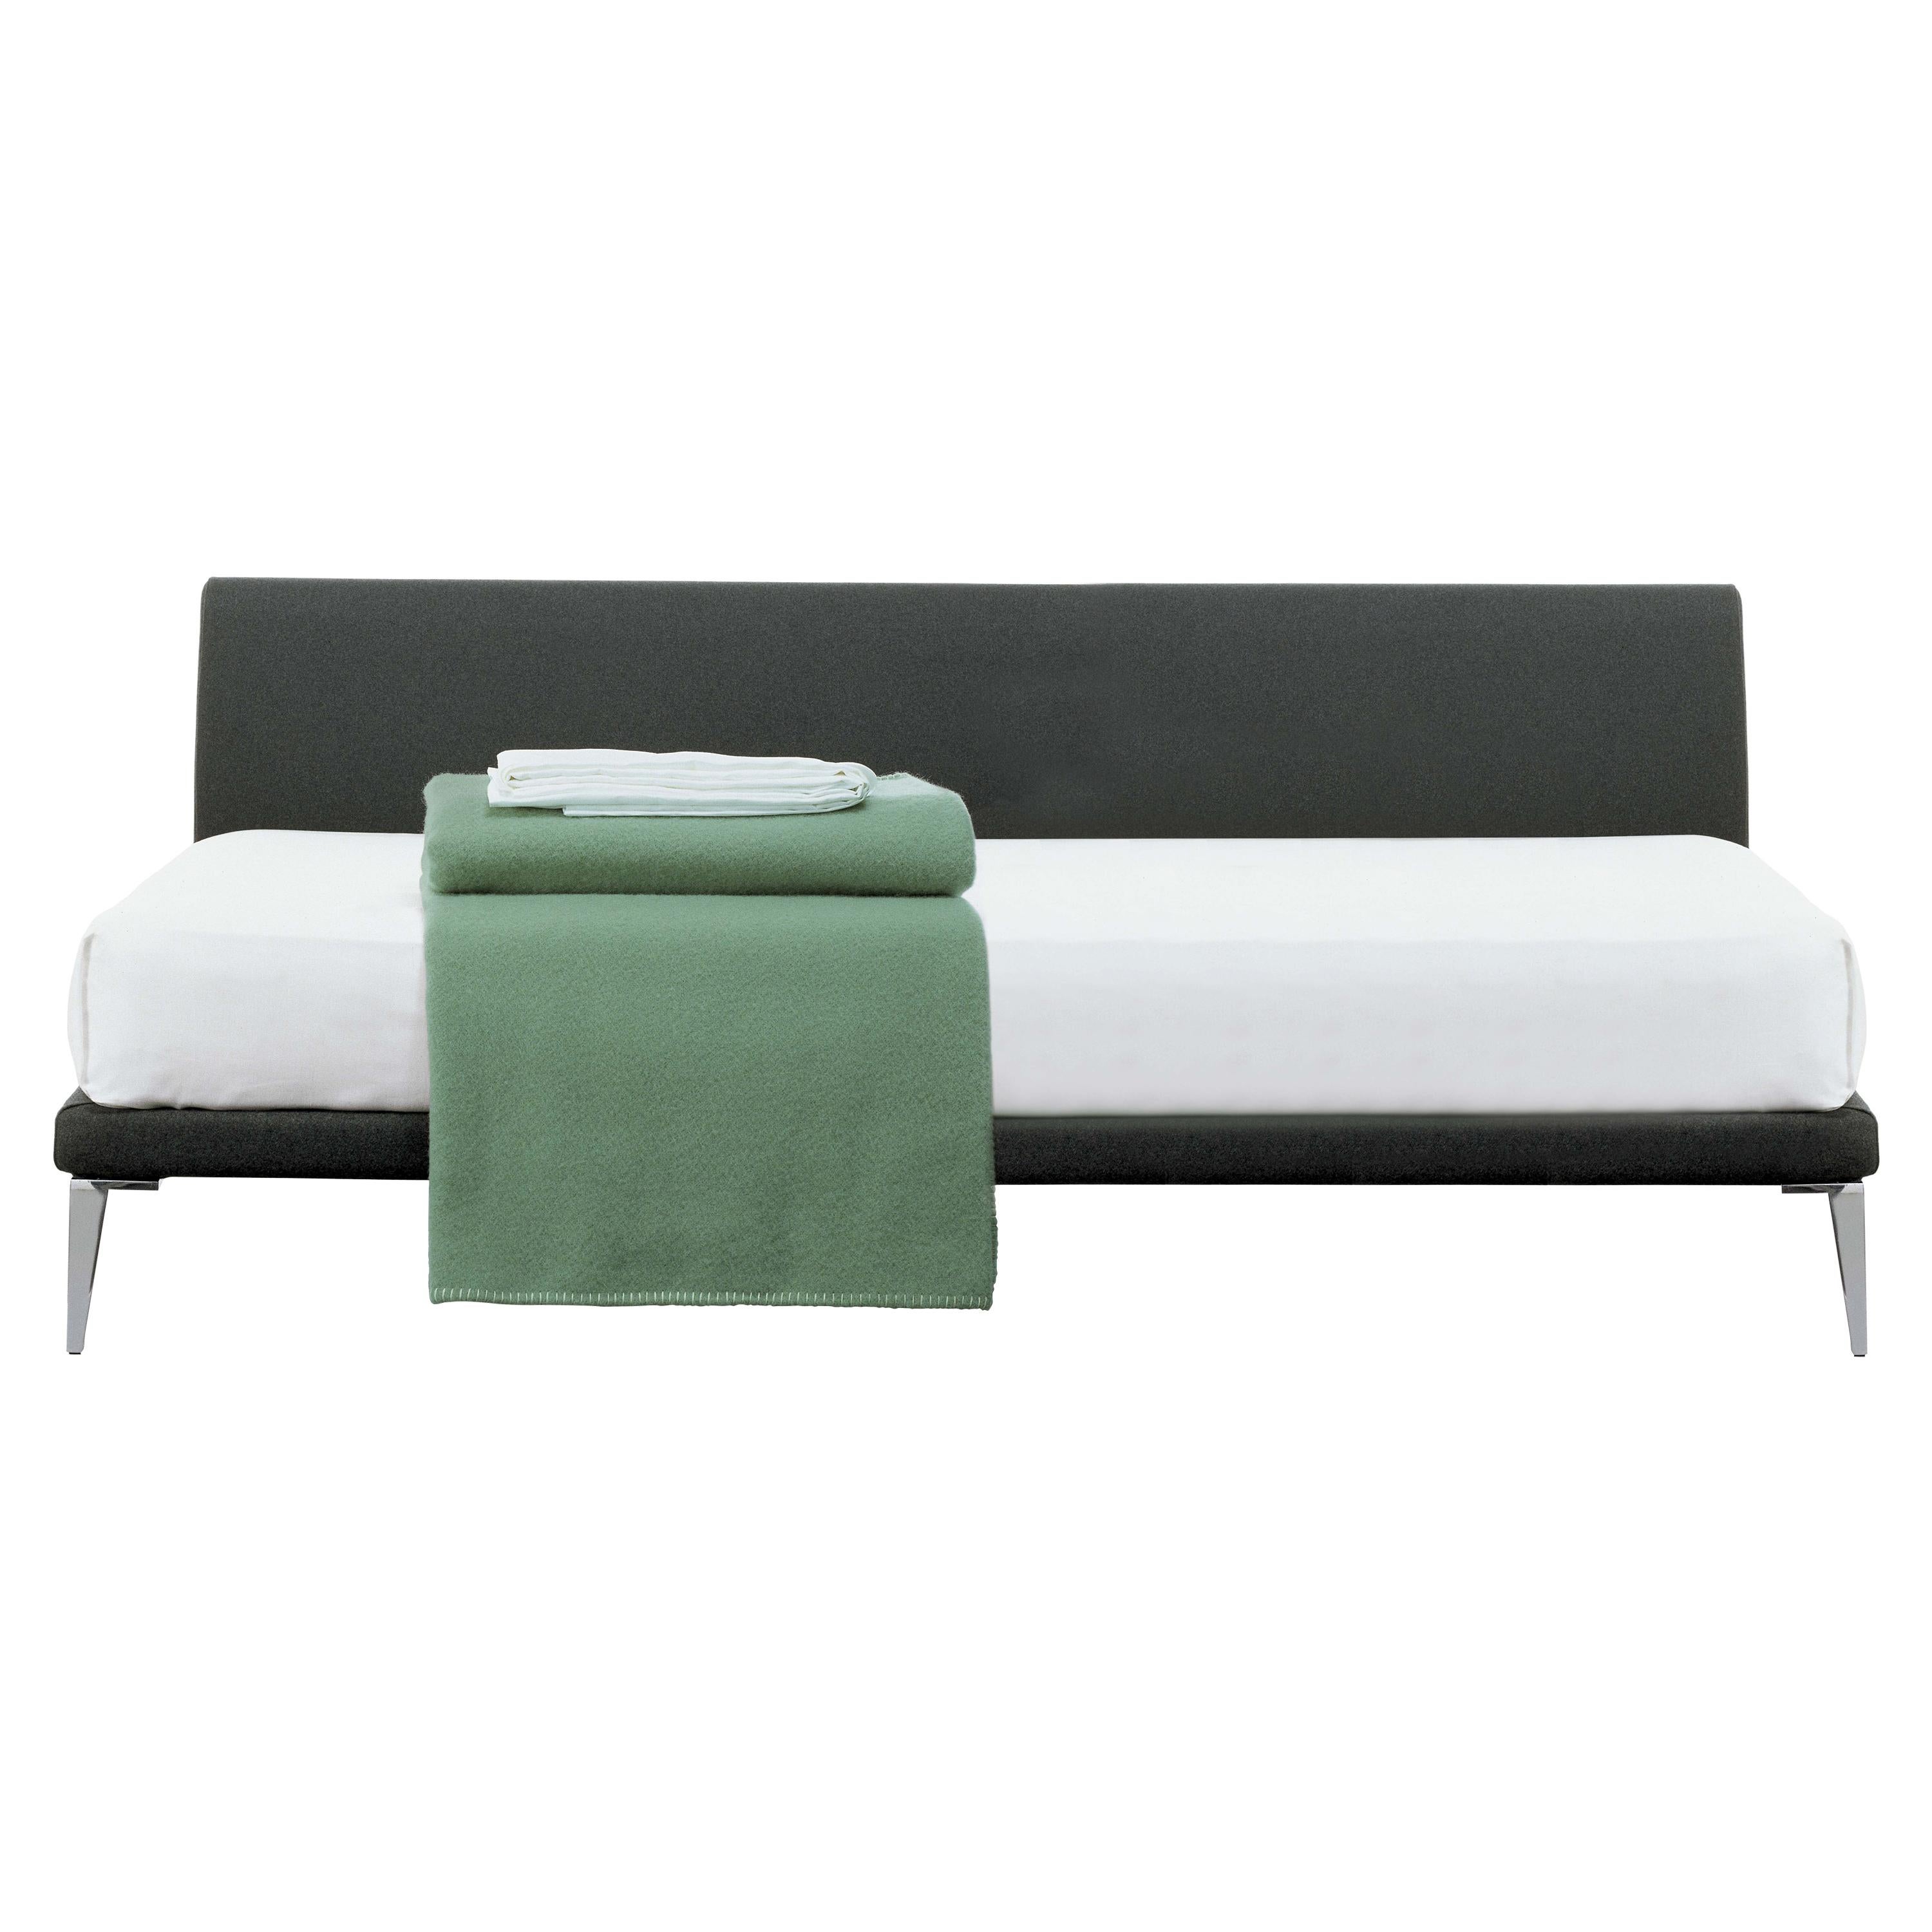 For Sale: Gray (Hallingdal 2 554) Jasper Morrison Bed in Fir and Poplar Plywood and Metal Frame for Cappellini